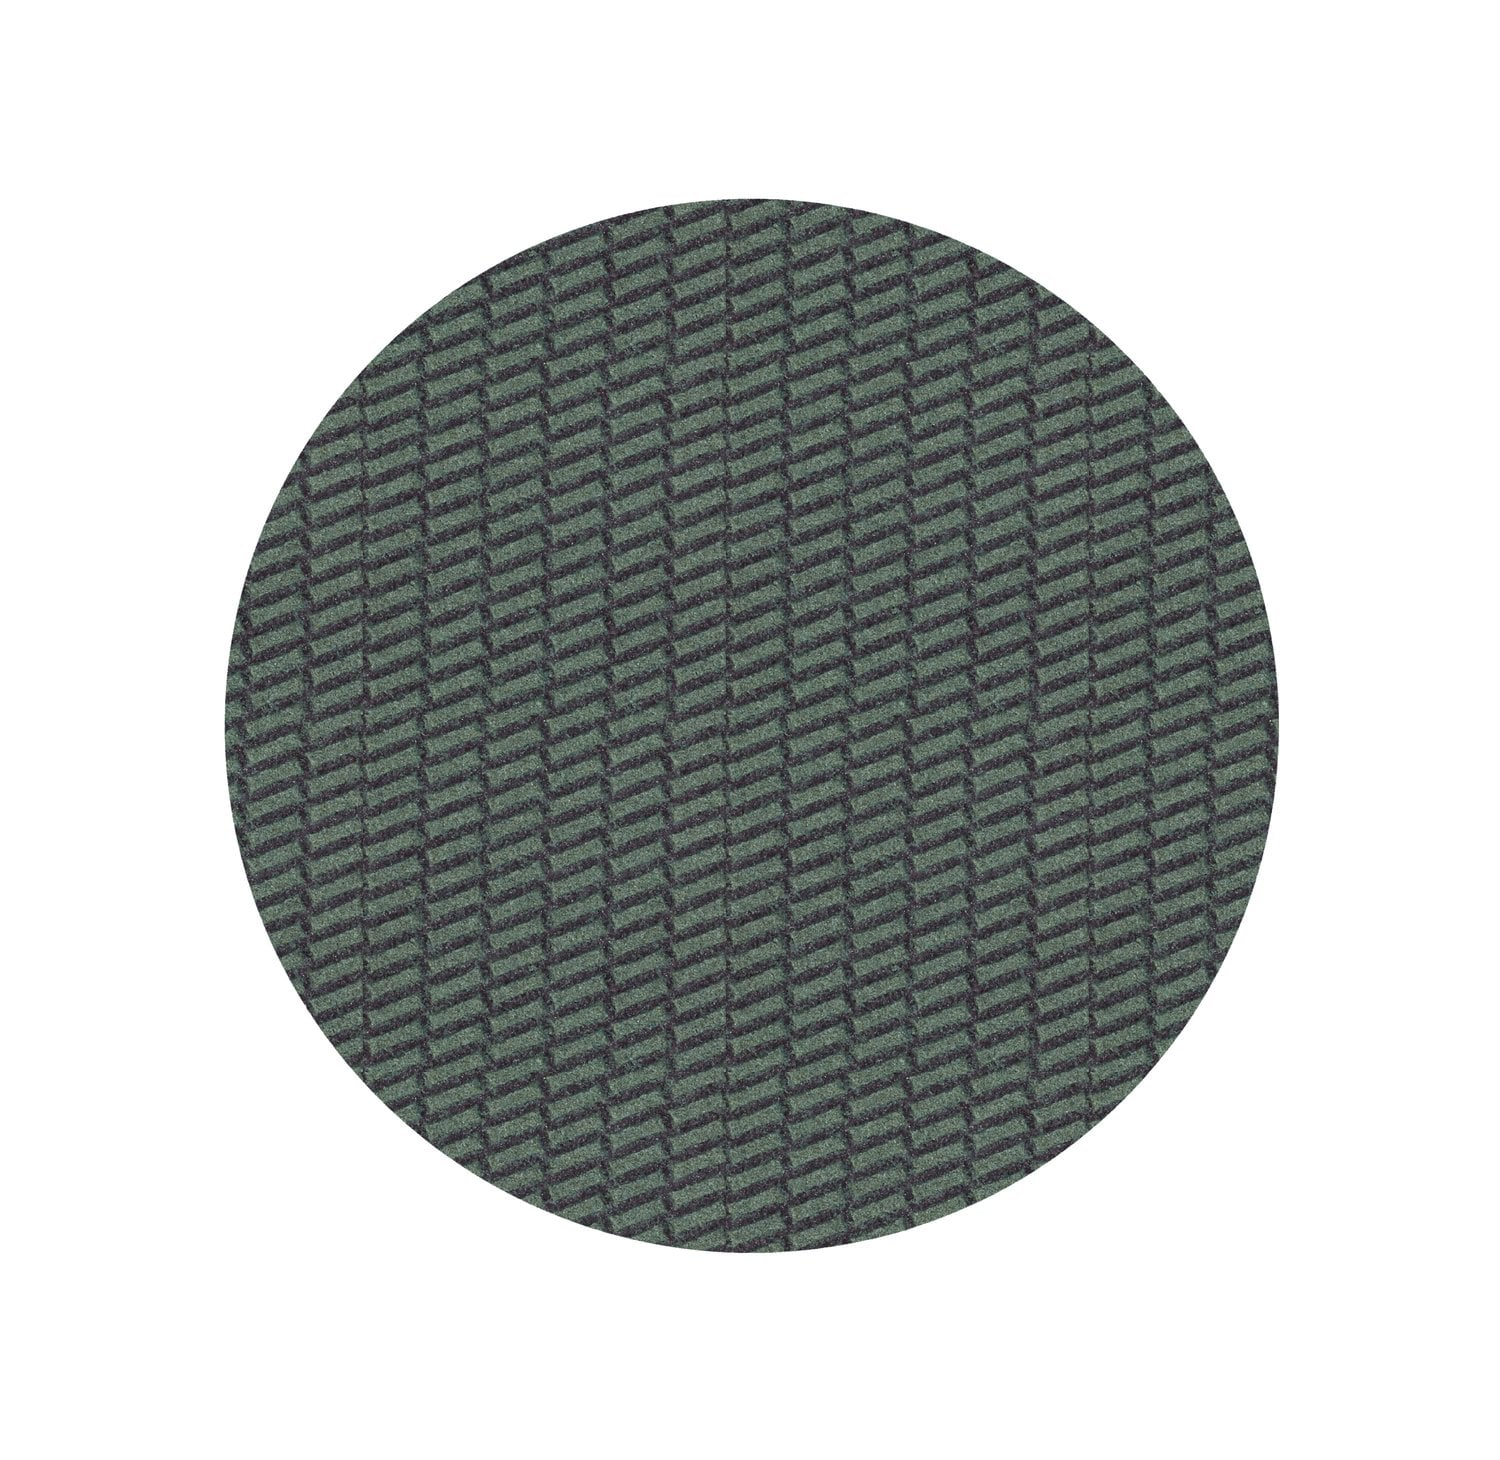 7100013372 - 3M Trizact Hookit Cloth Disc 337DC, A30 X-weight, Config